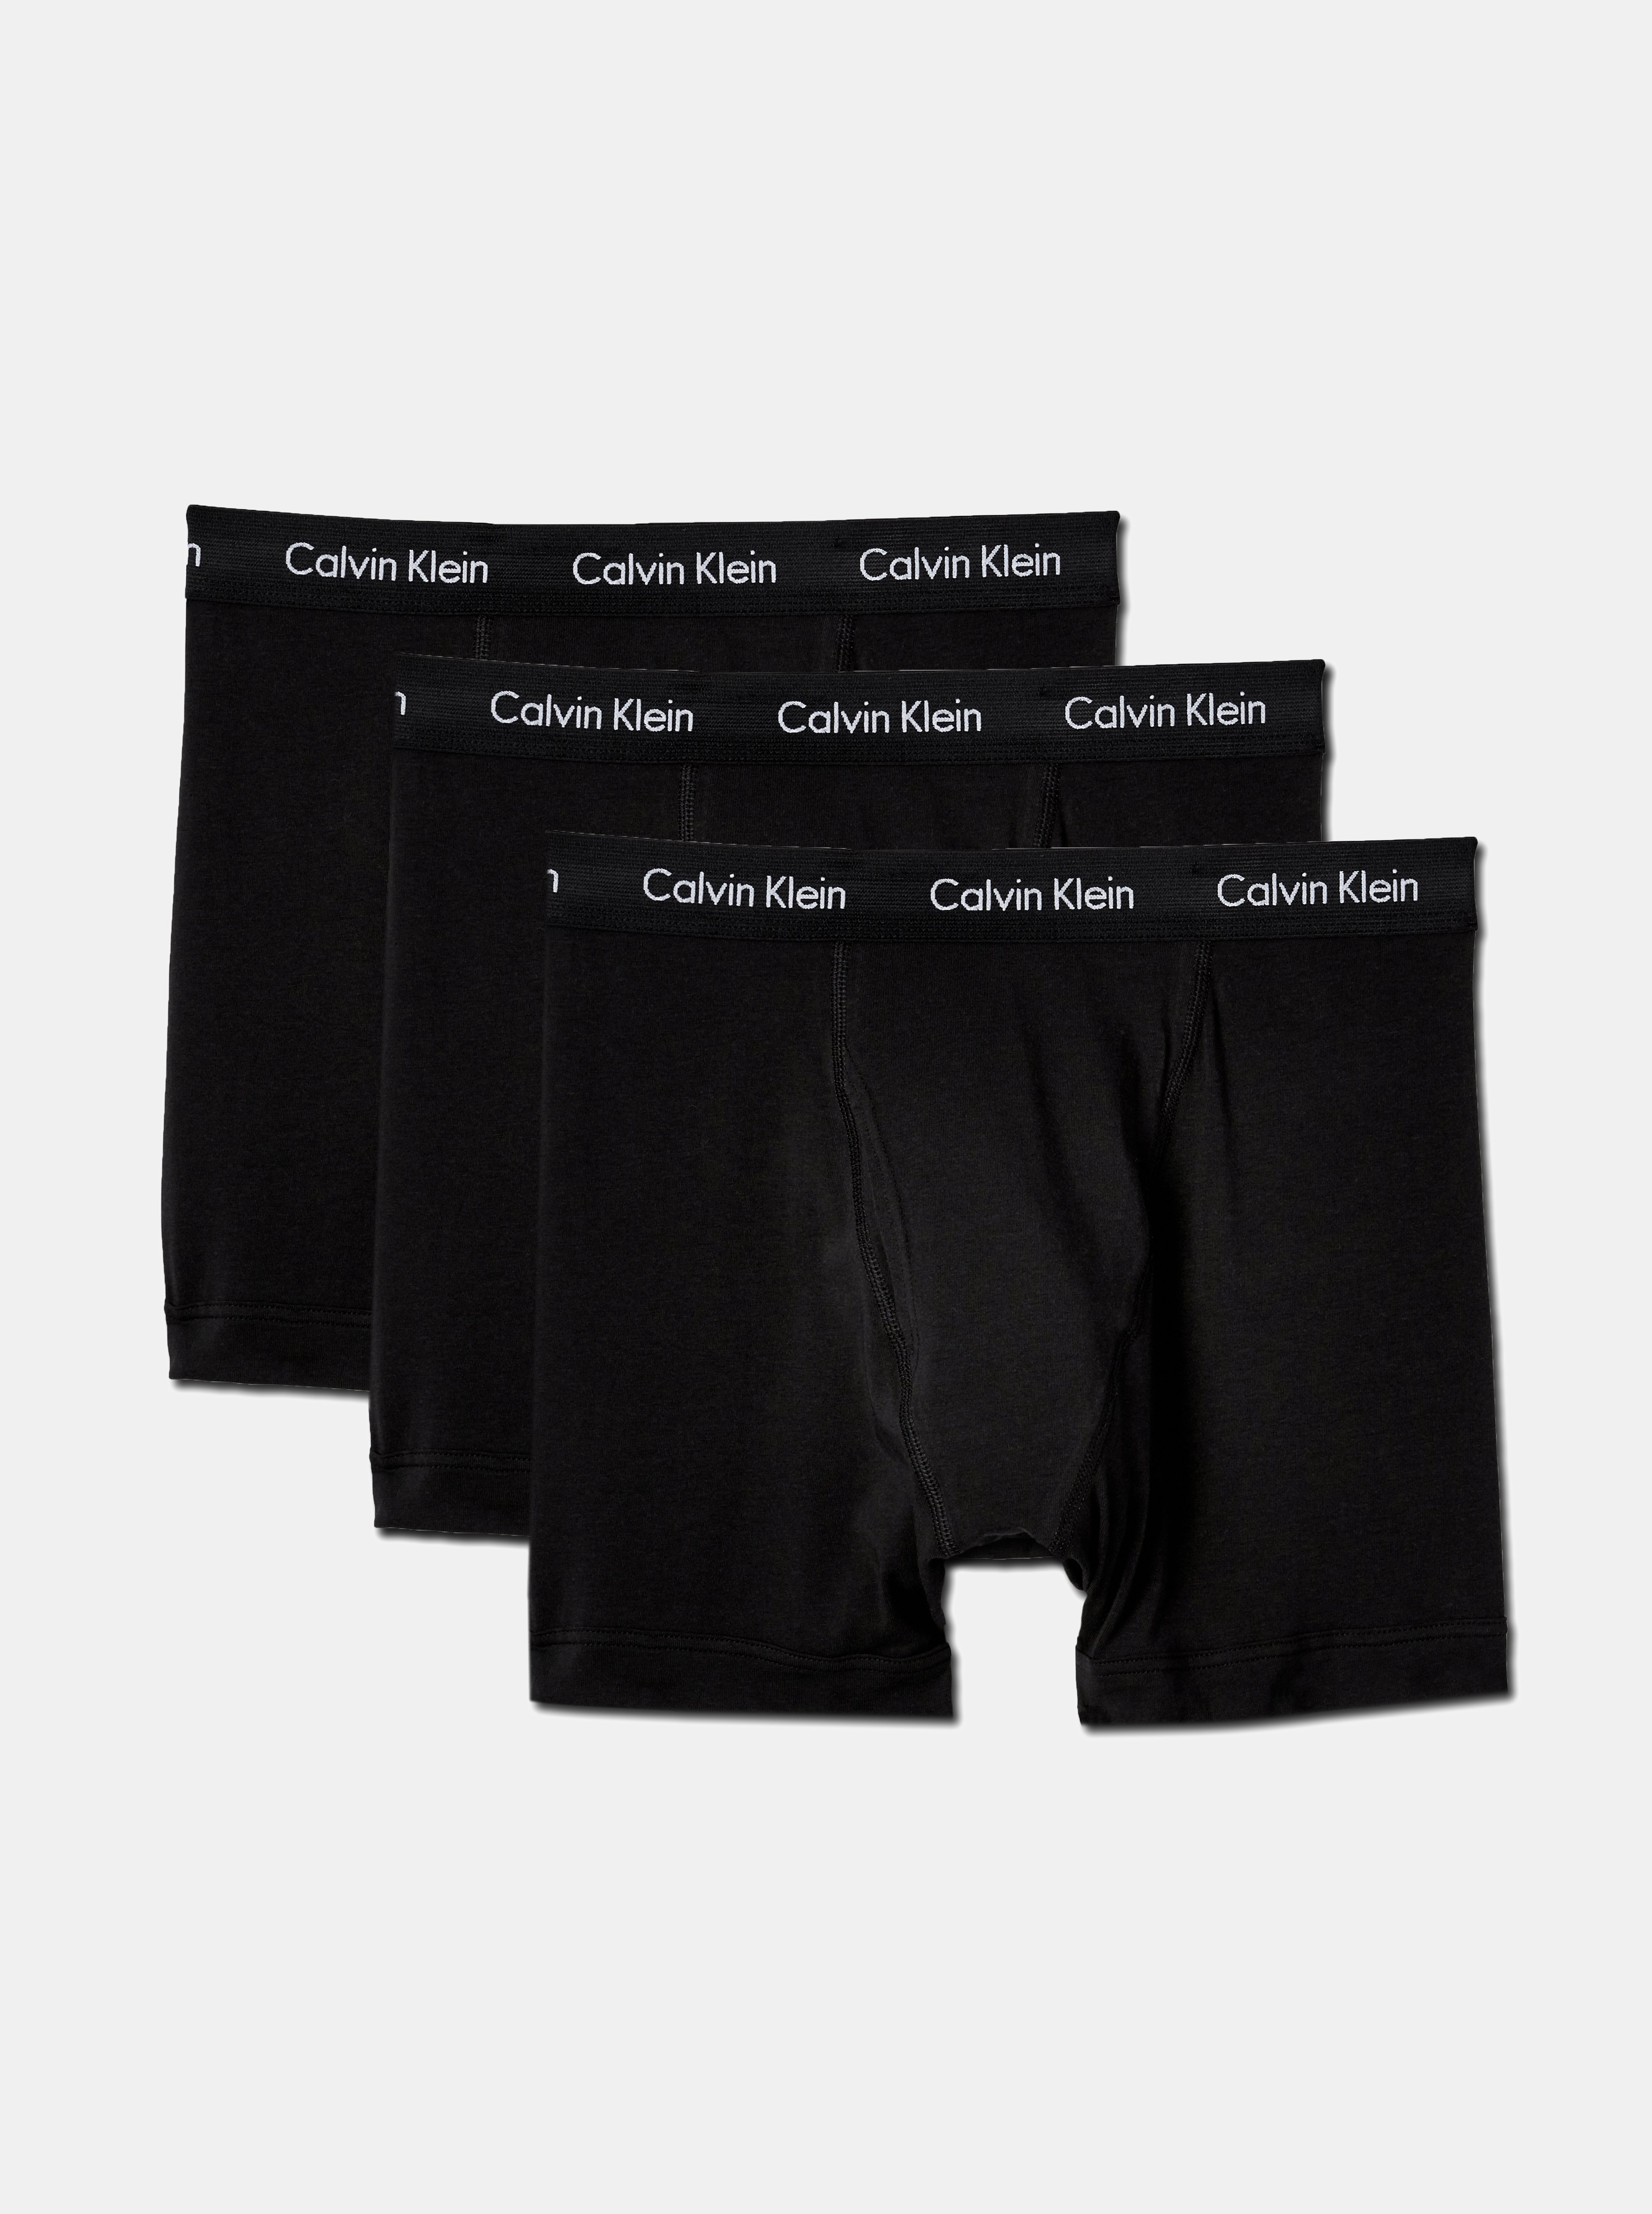 3 pack of calvin klein boxers